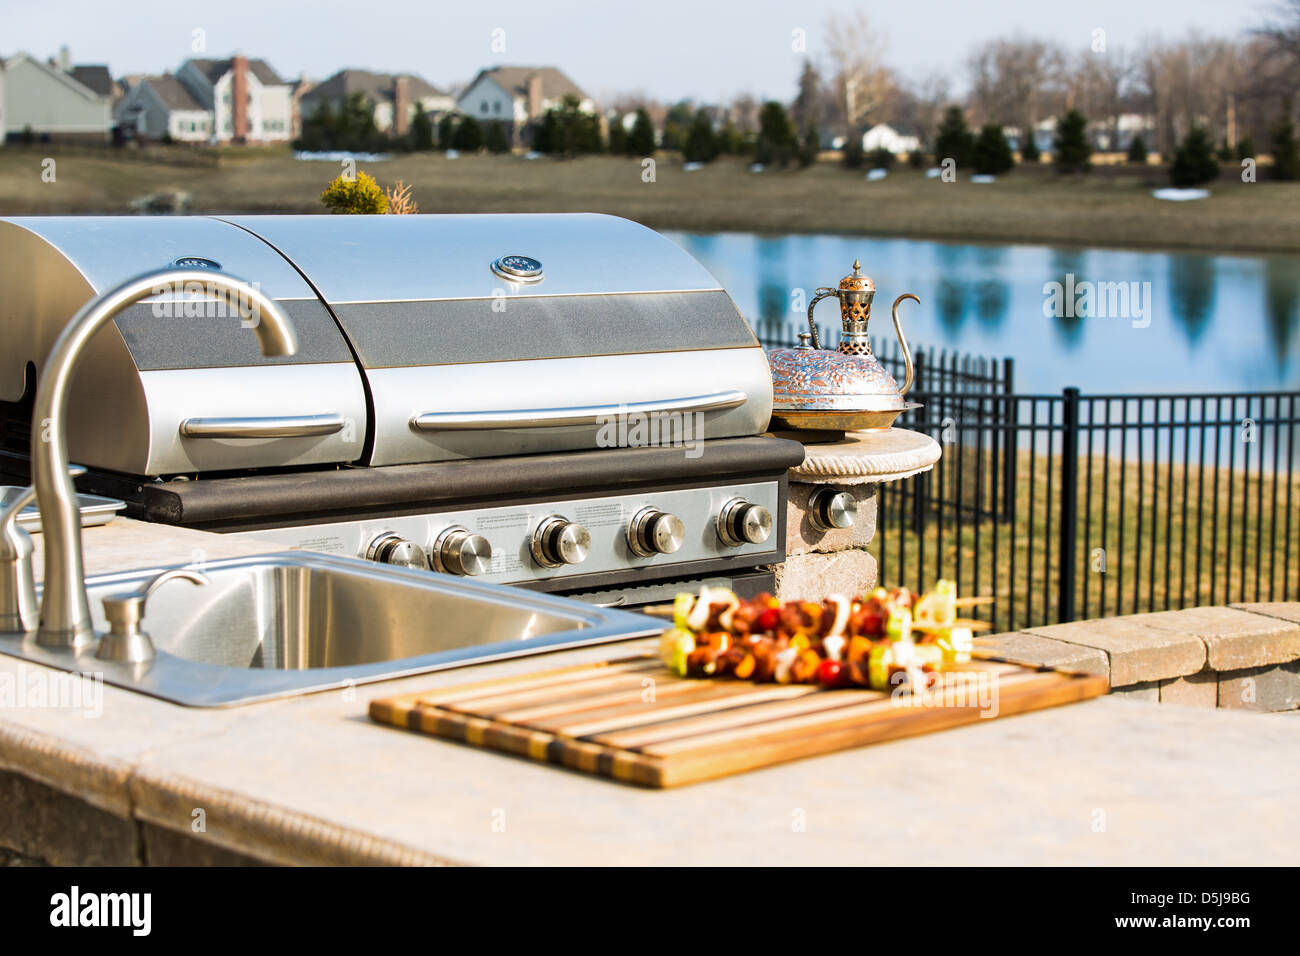 Bearbecue in outside kitchen along with sink and complimented with skewers and copper plate. Stock Photo